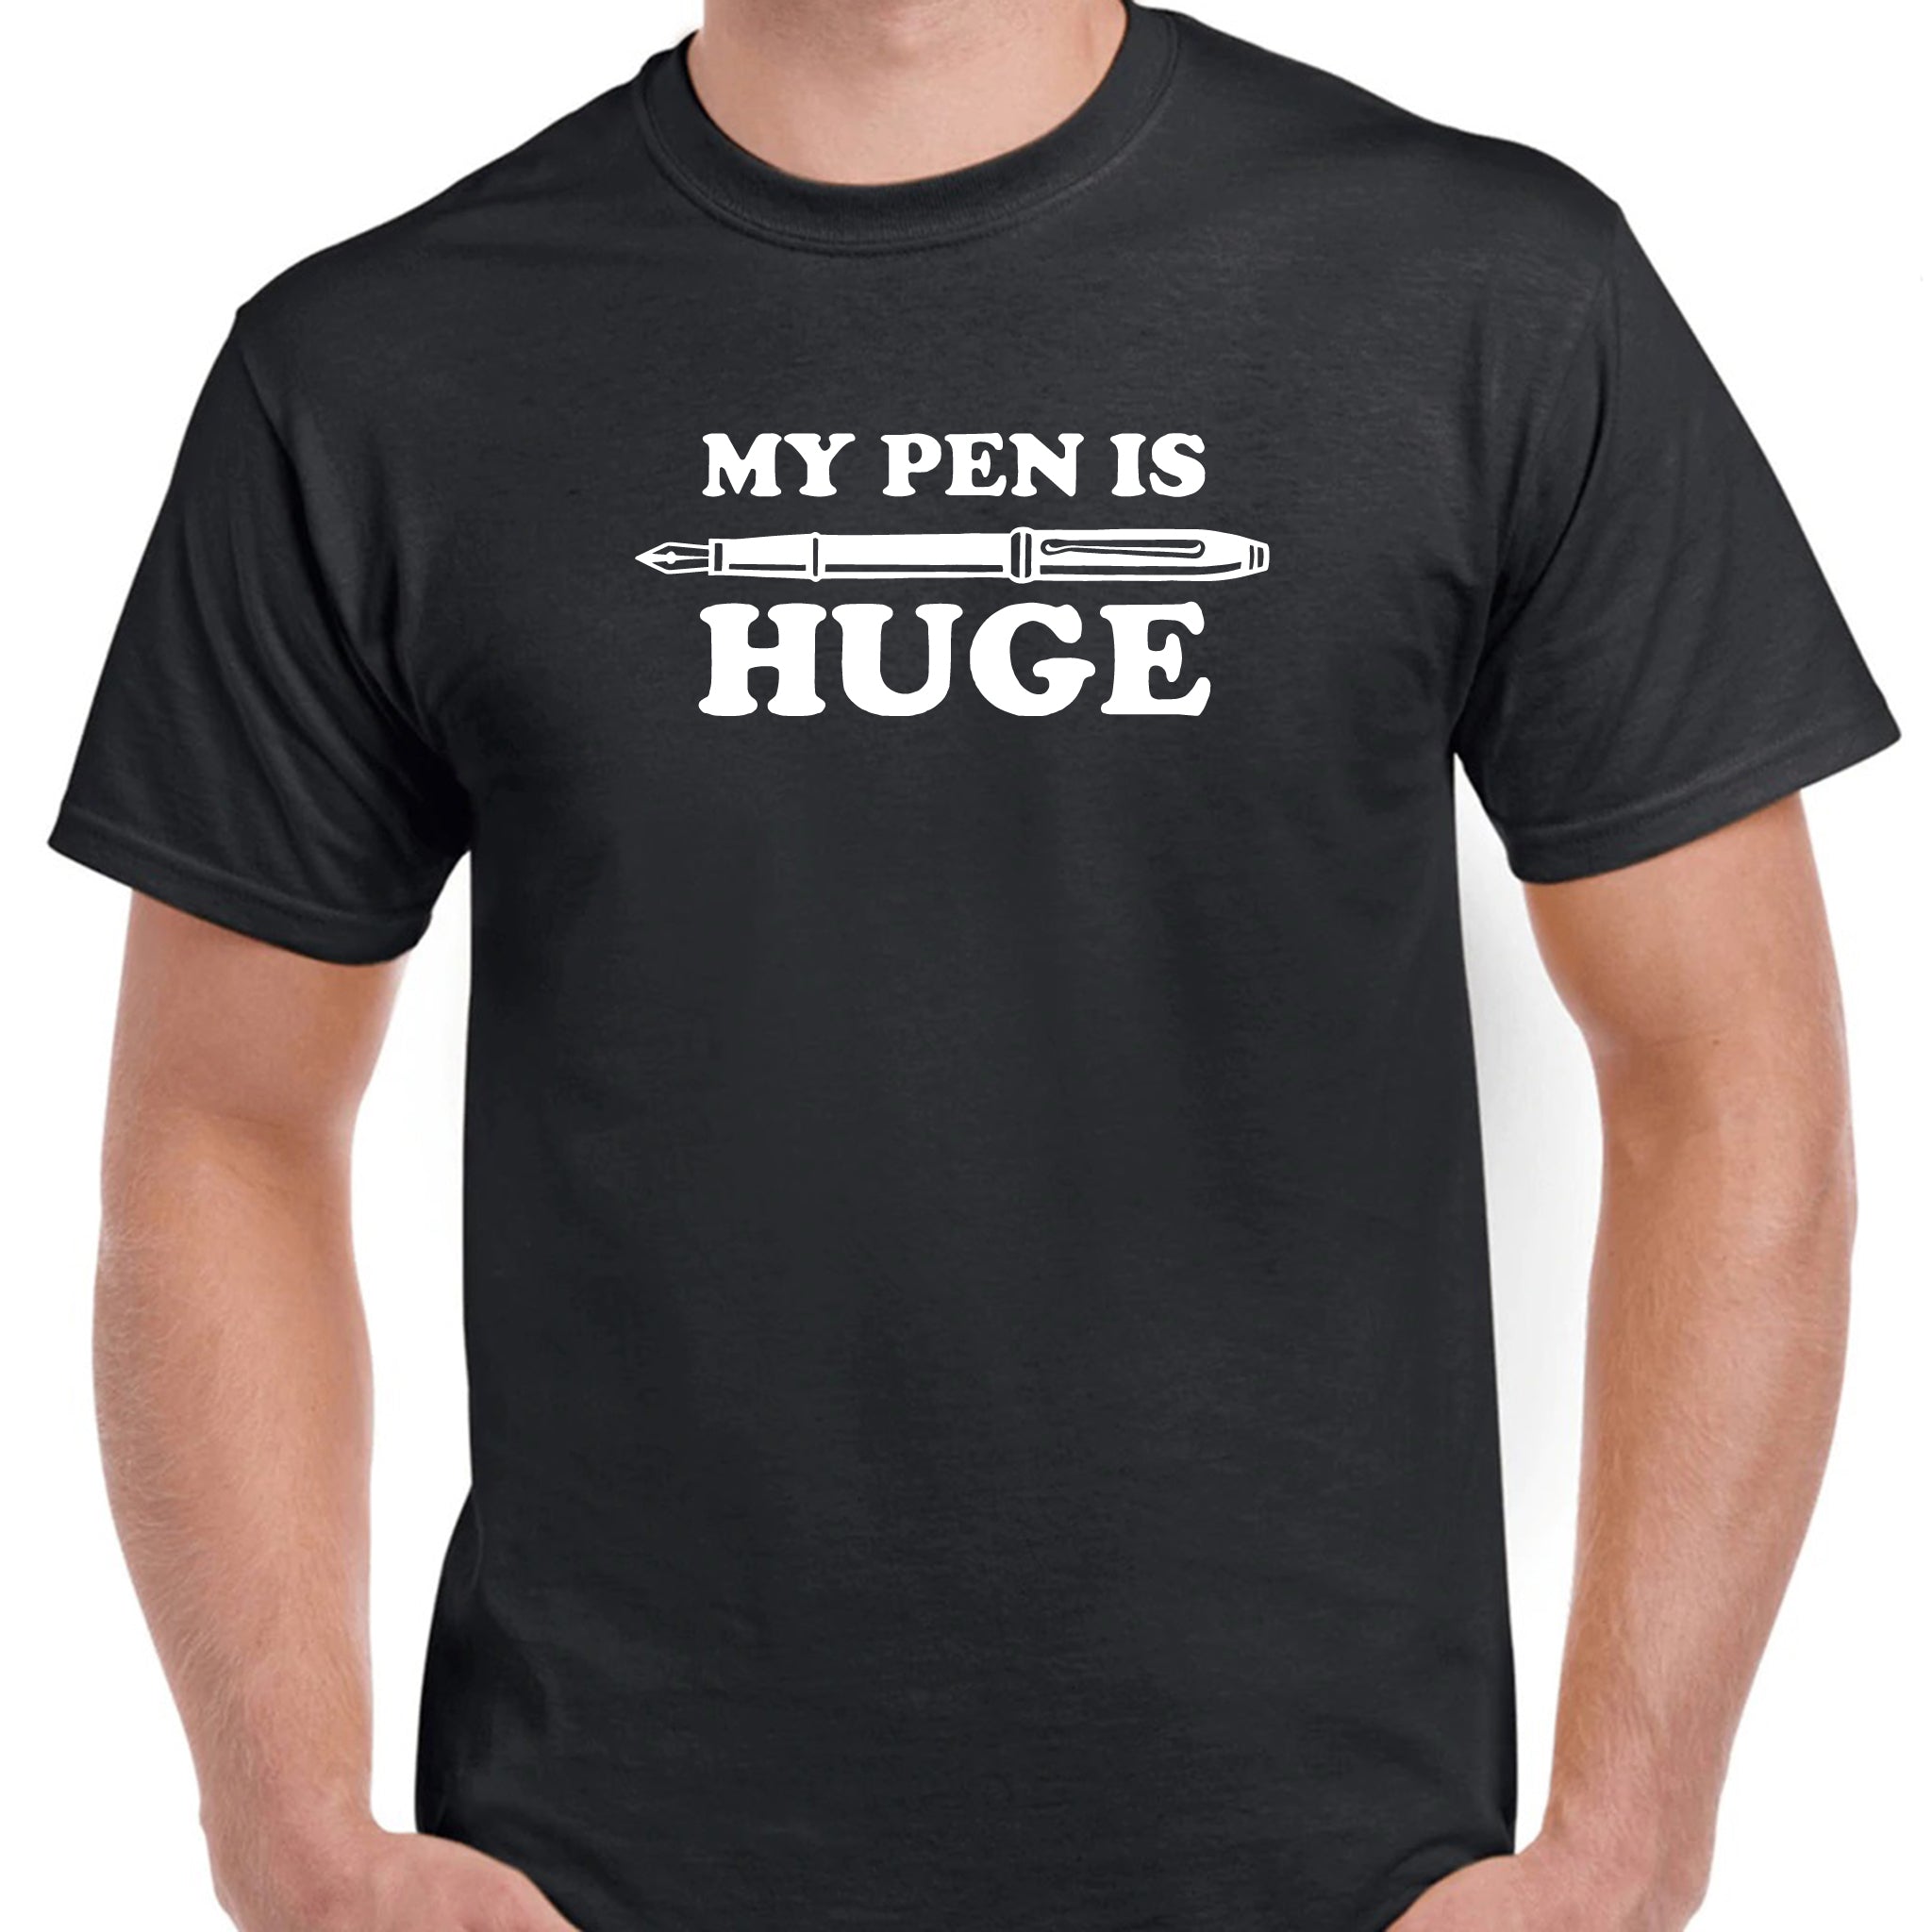 My Pen Is Huge Unisex T-Shirt: Inappropriate, Offensive and Funny